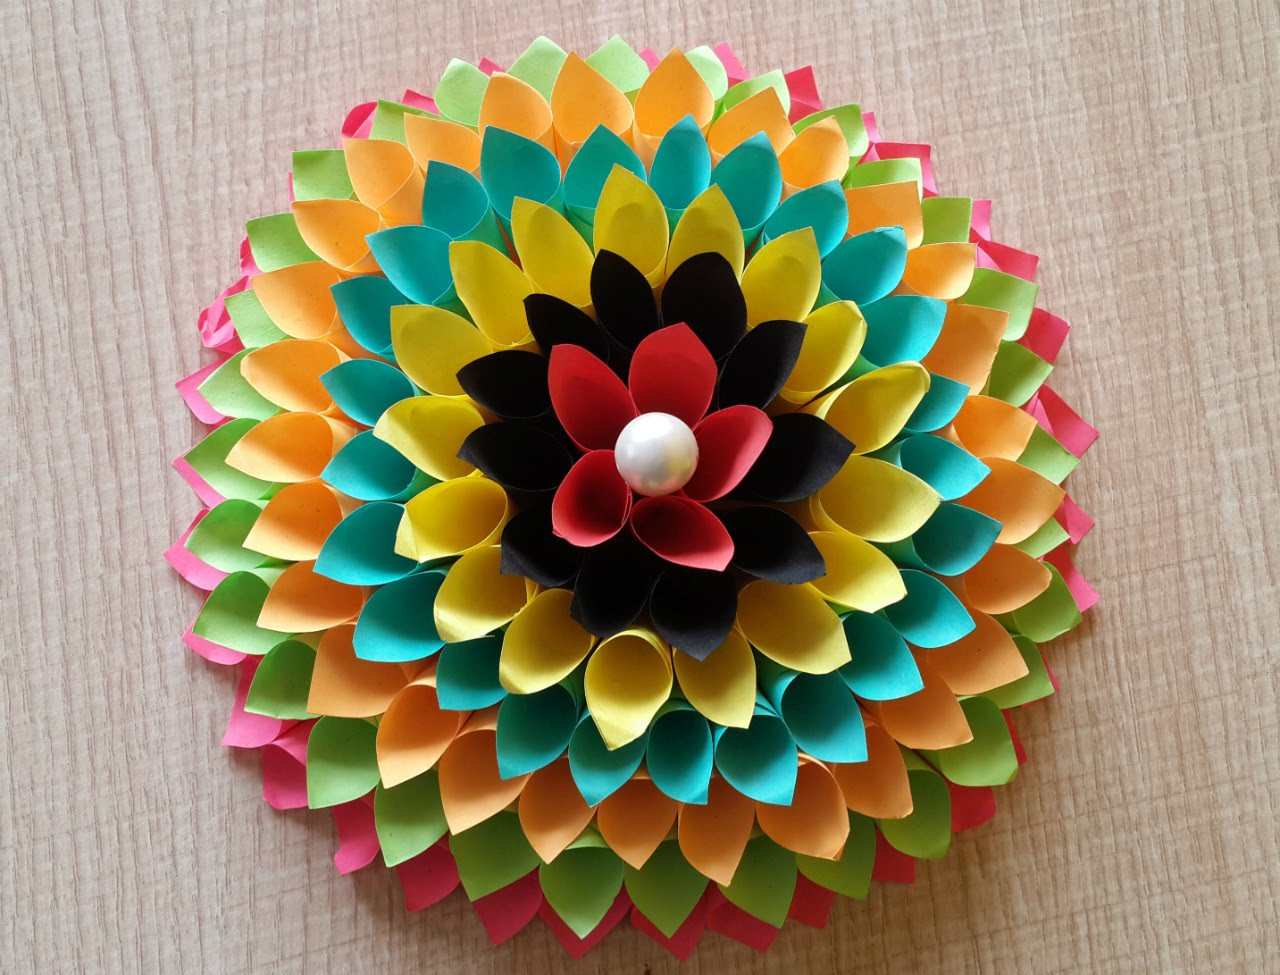 Creative Craft Ideas For Adults
 Amazing & Easy Art & Craft with Awesome Decoration Ideas